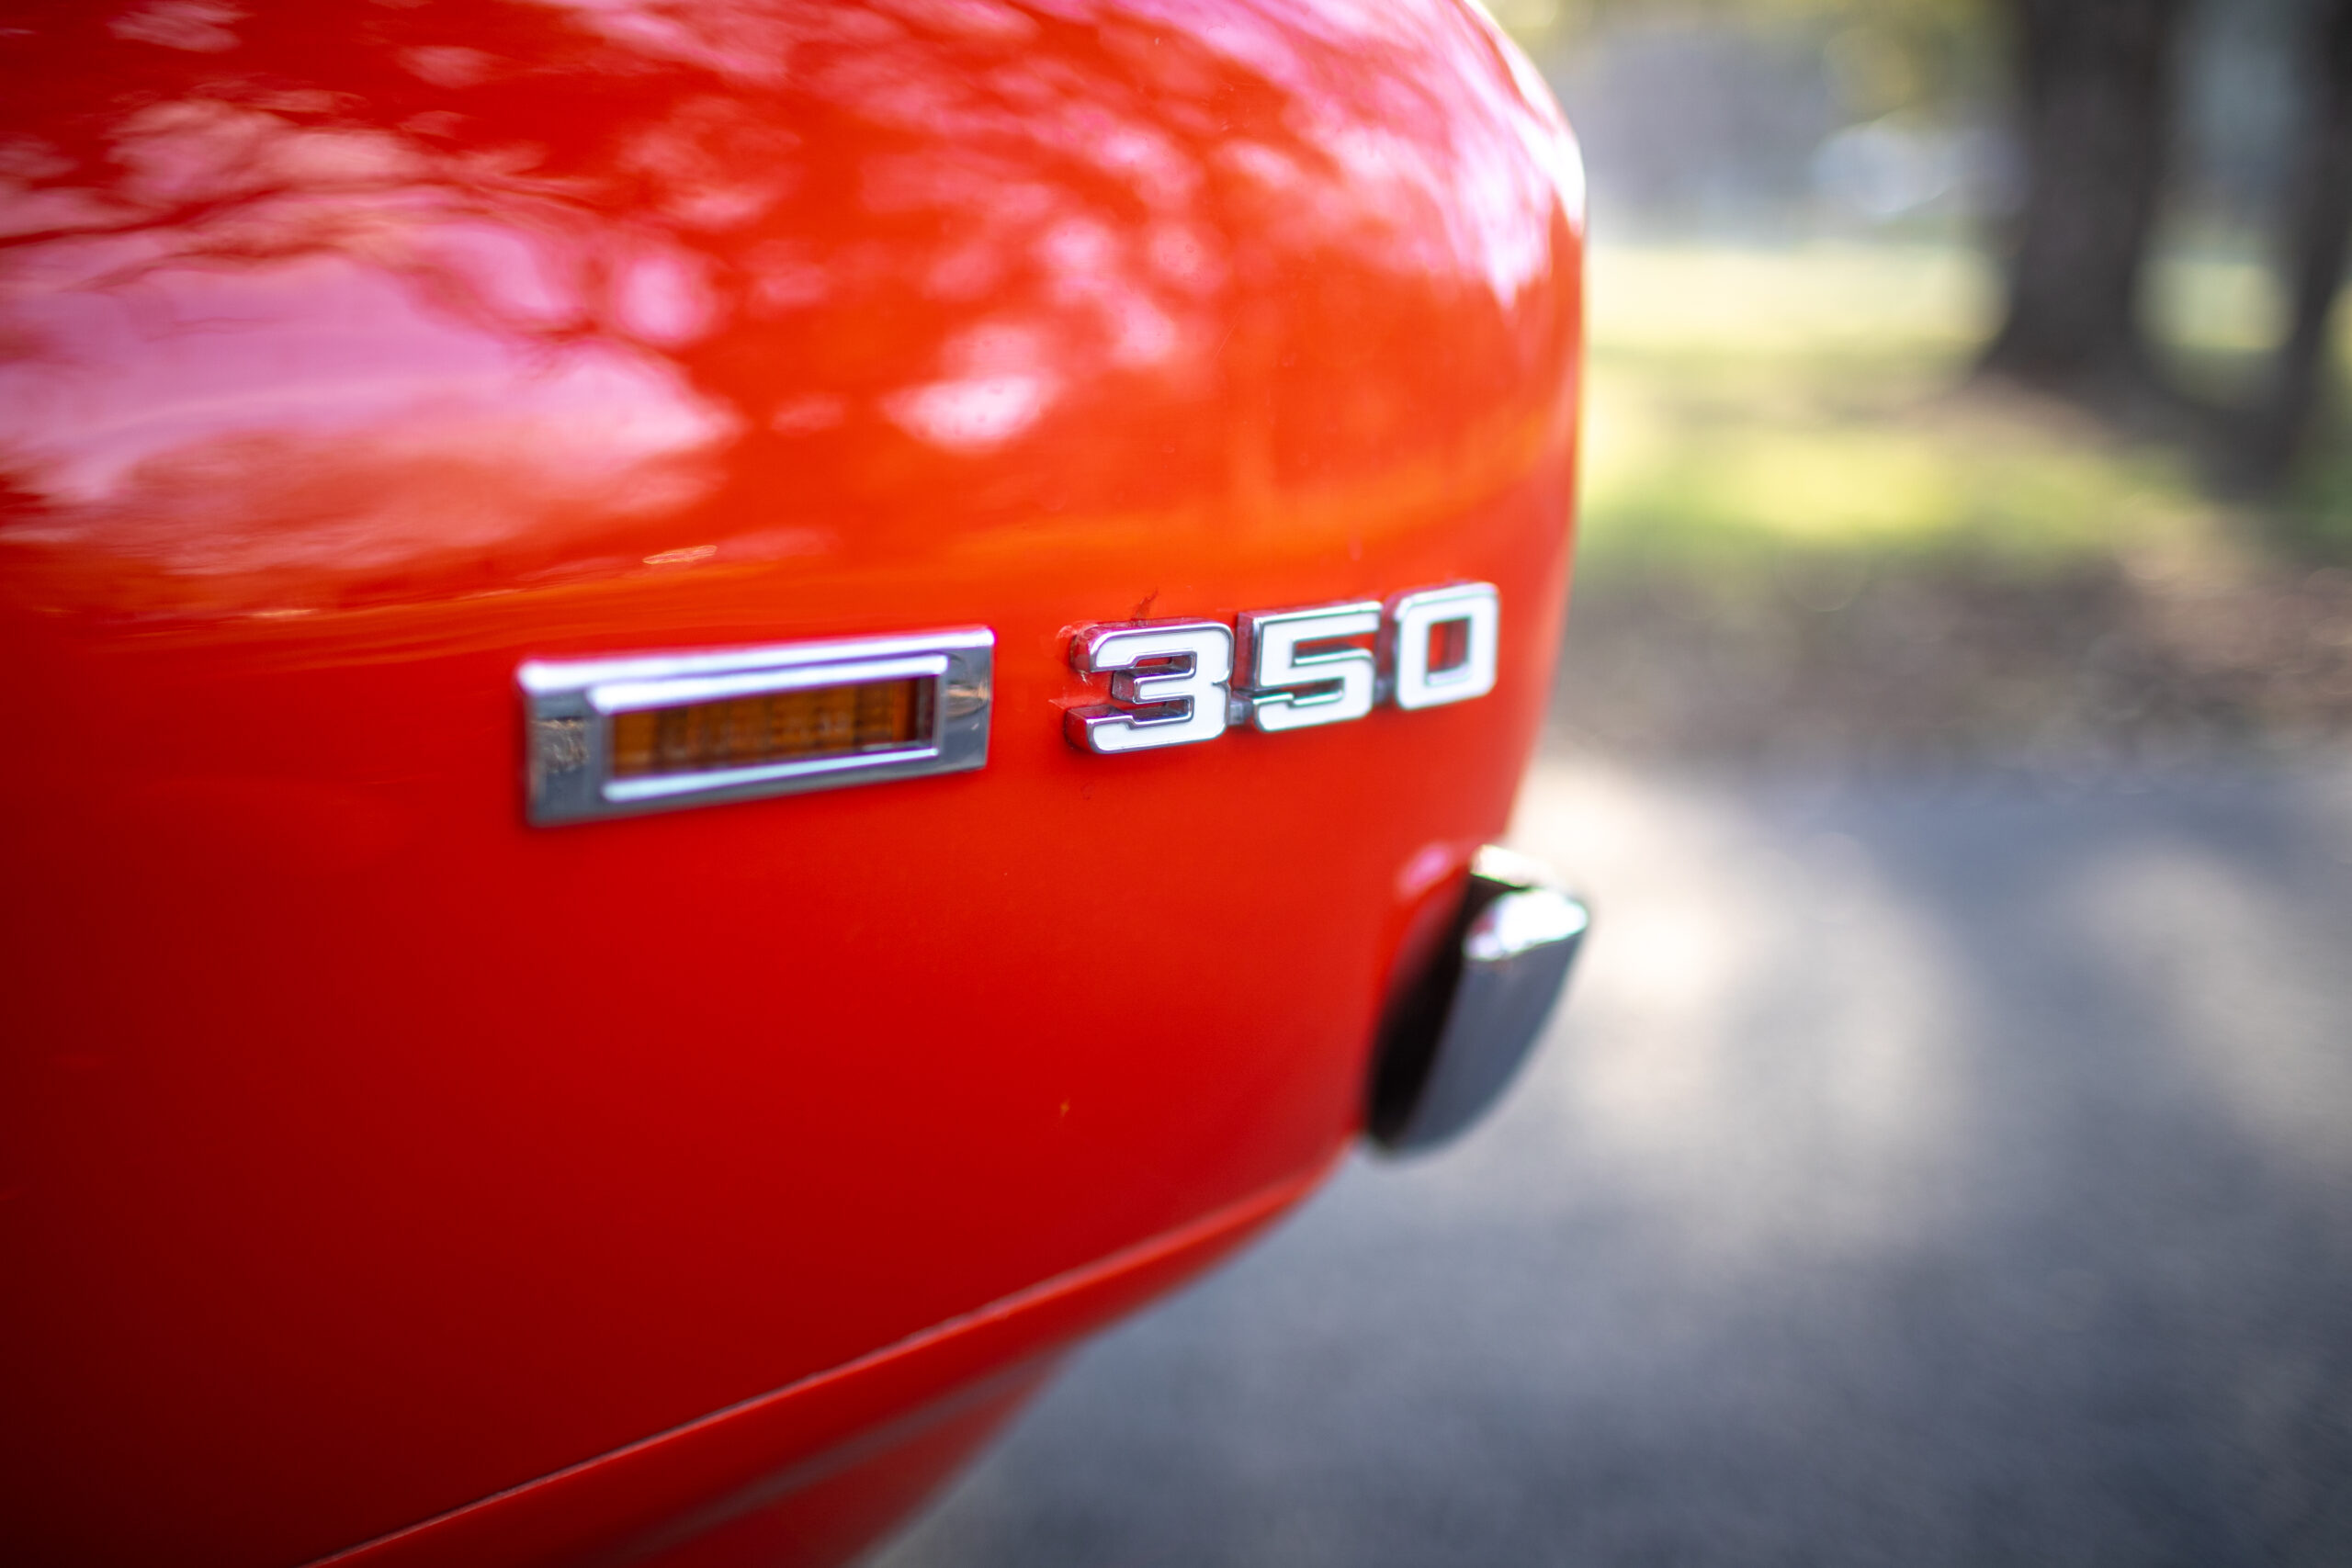 Close-up view of a red car rear bumper displaying a chrome "350" badge and a rectangular side marker light.